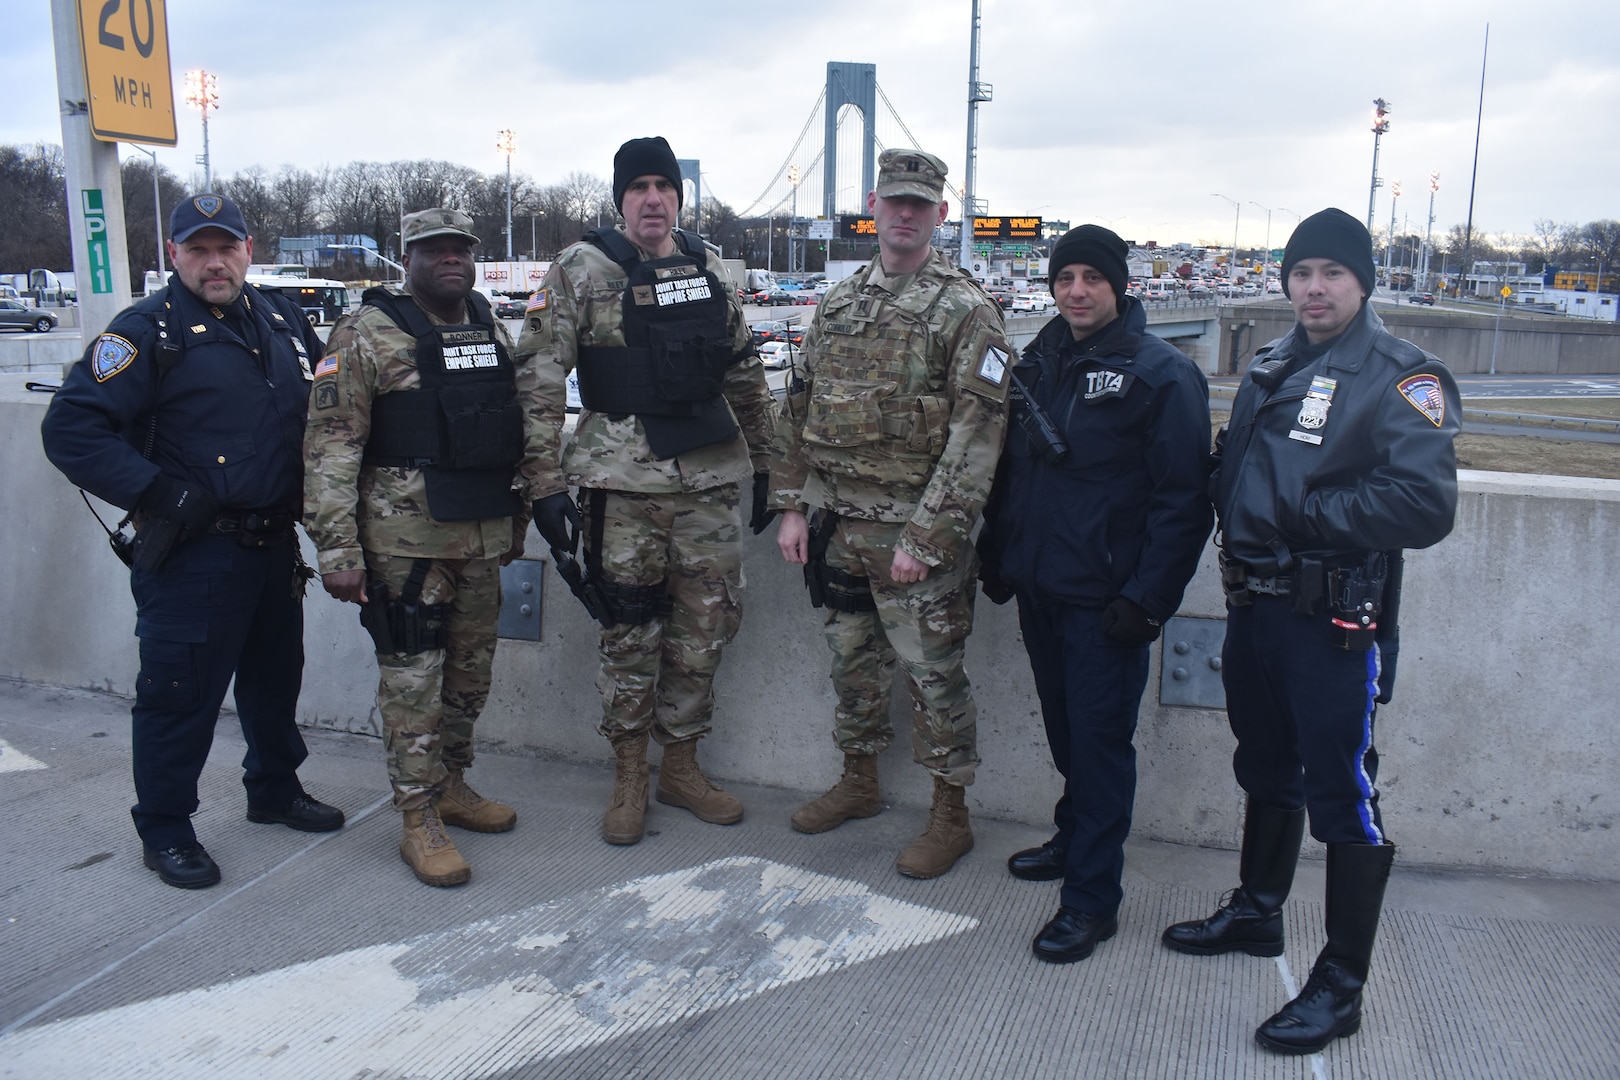 New York National Guard Soldiers of Joint Task Force Empire Shield stand with Triburough Bridge and Tunnel Authority officers and State Troopers, at the Verrazano Bridge, Staten Island, N.Y., Jan. 10, 2019. Soldiers and Troopers were conducting Operation Catch-All, a security operation to prevent terrorism in New York City and the Triburough area.